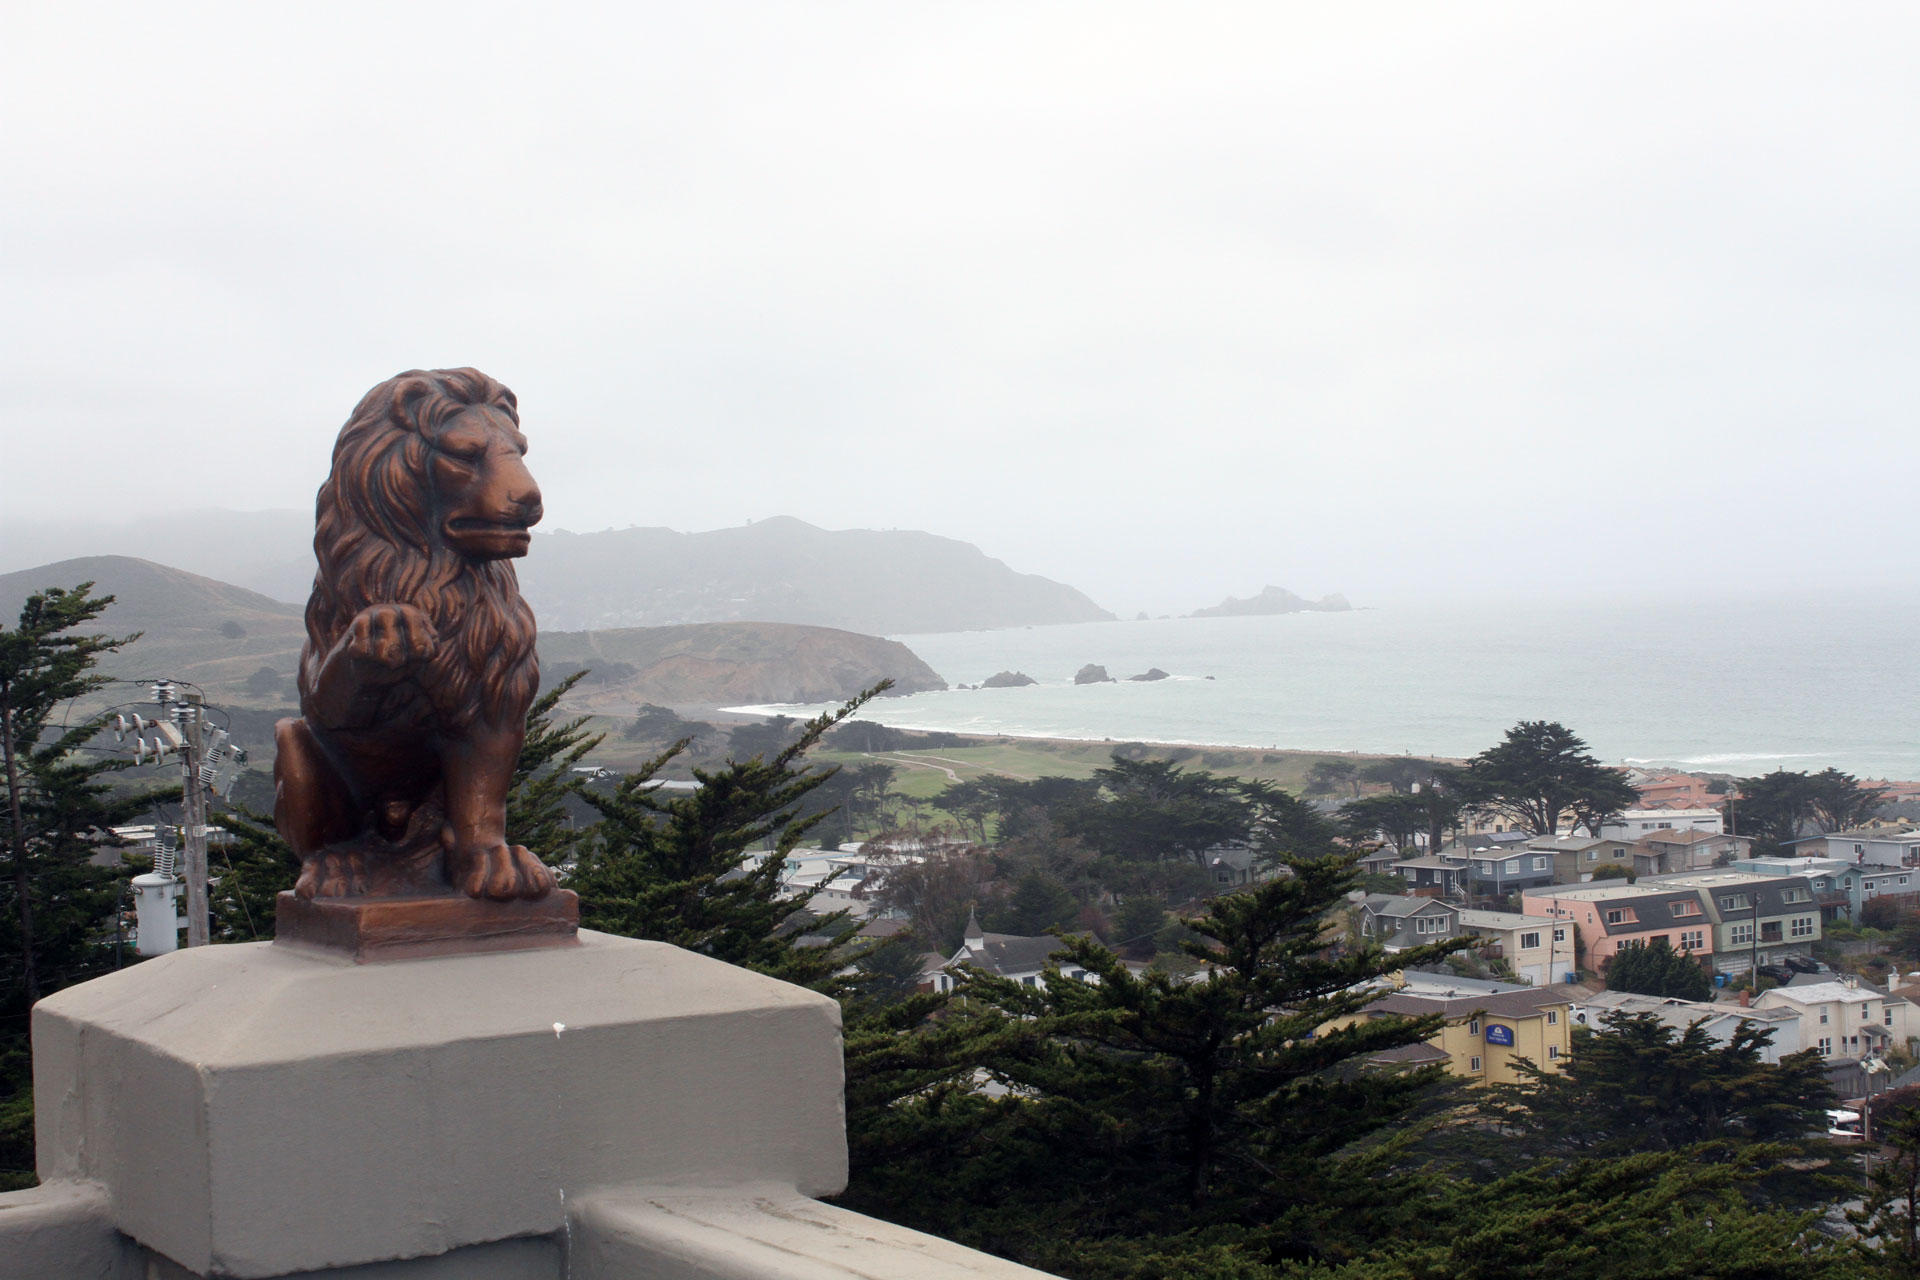 A lion statue in the foreground with view of Pacific ocean behind.